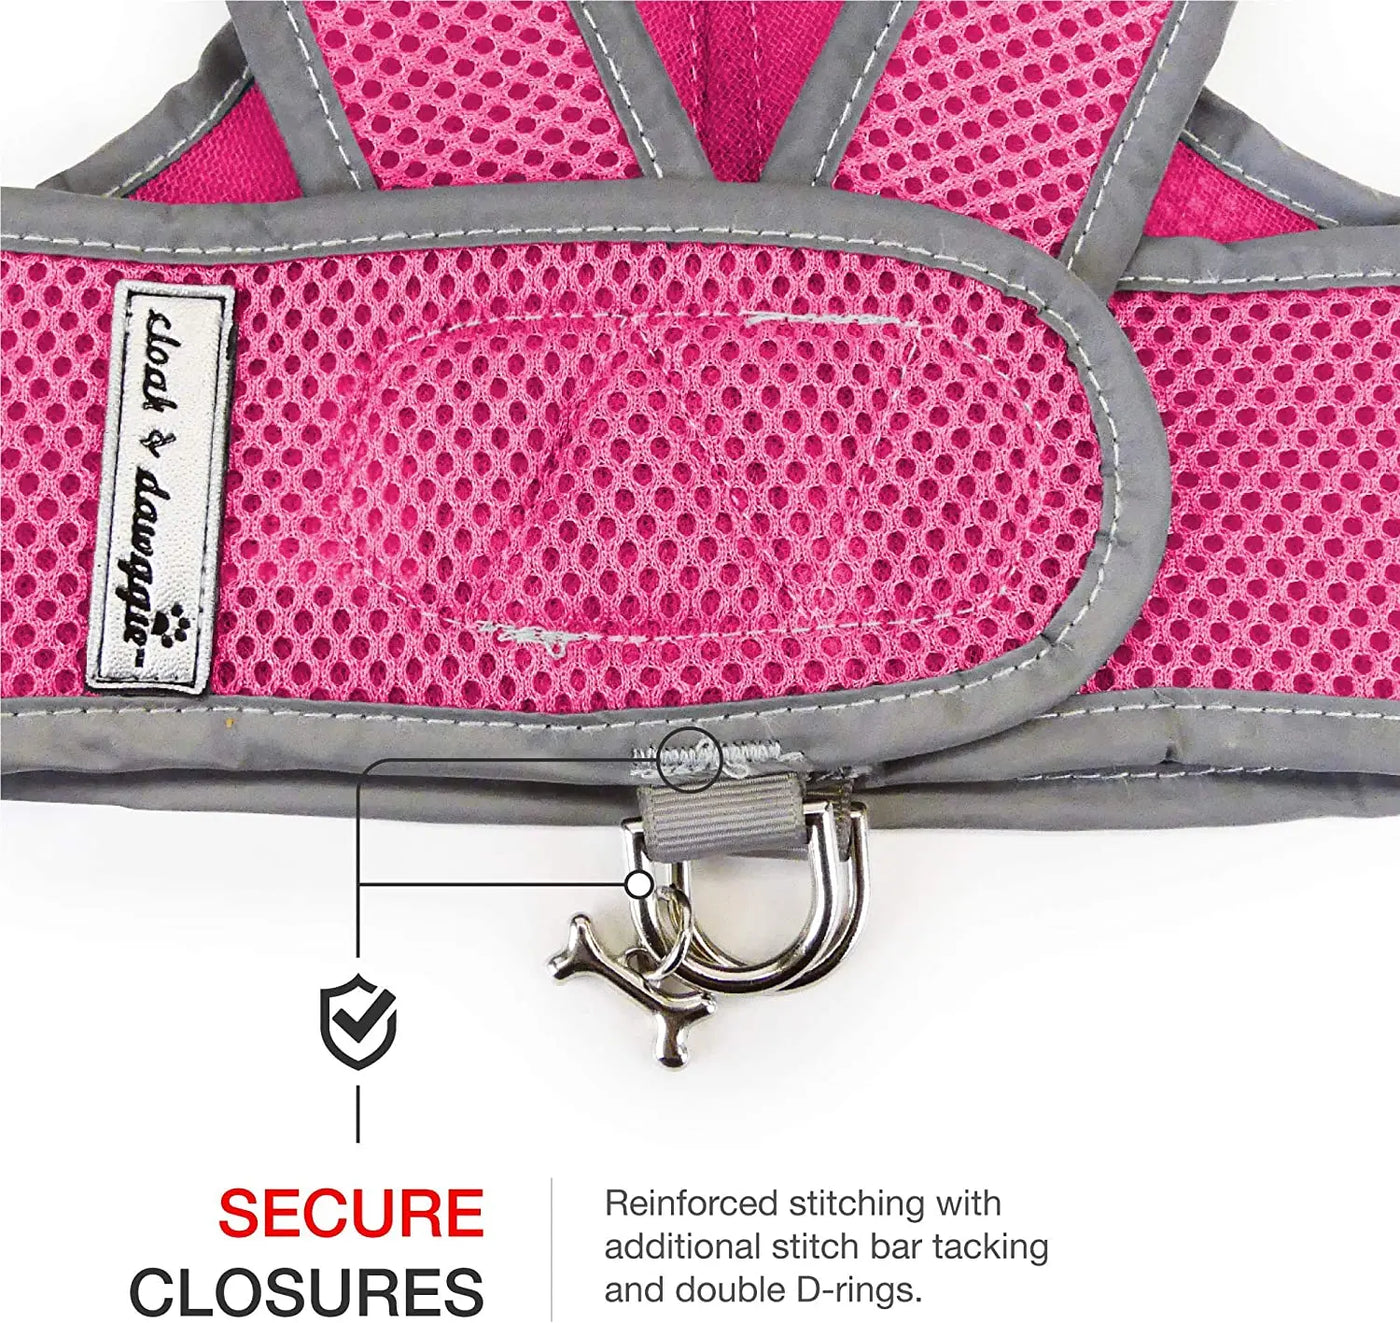 Classic mesh Step n Go harness in pink